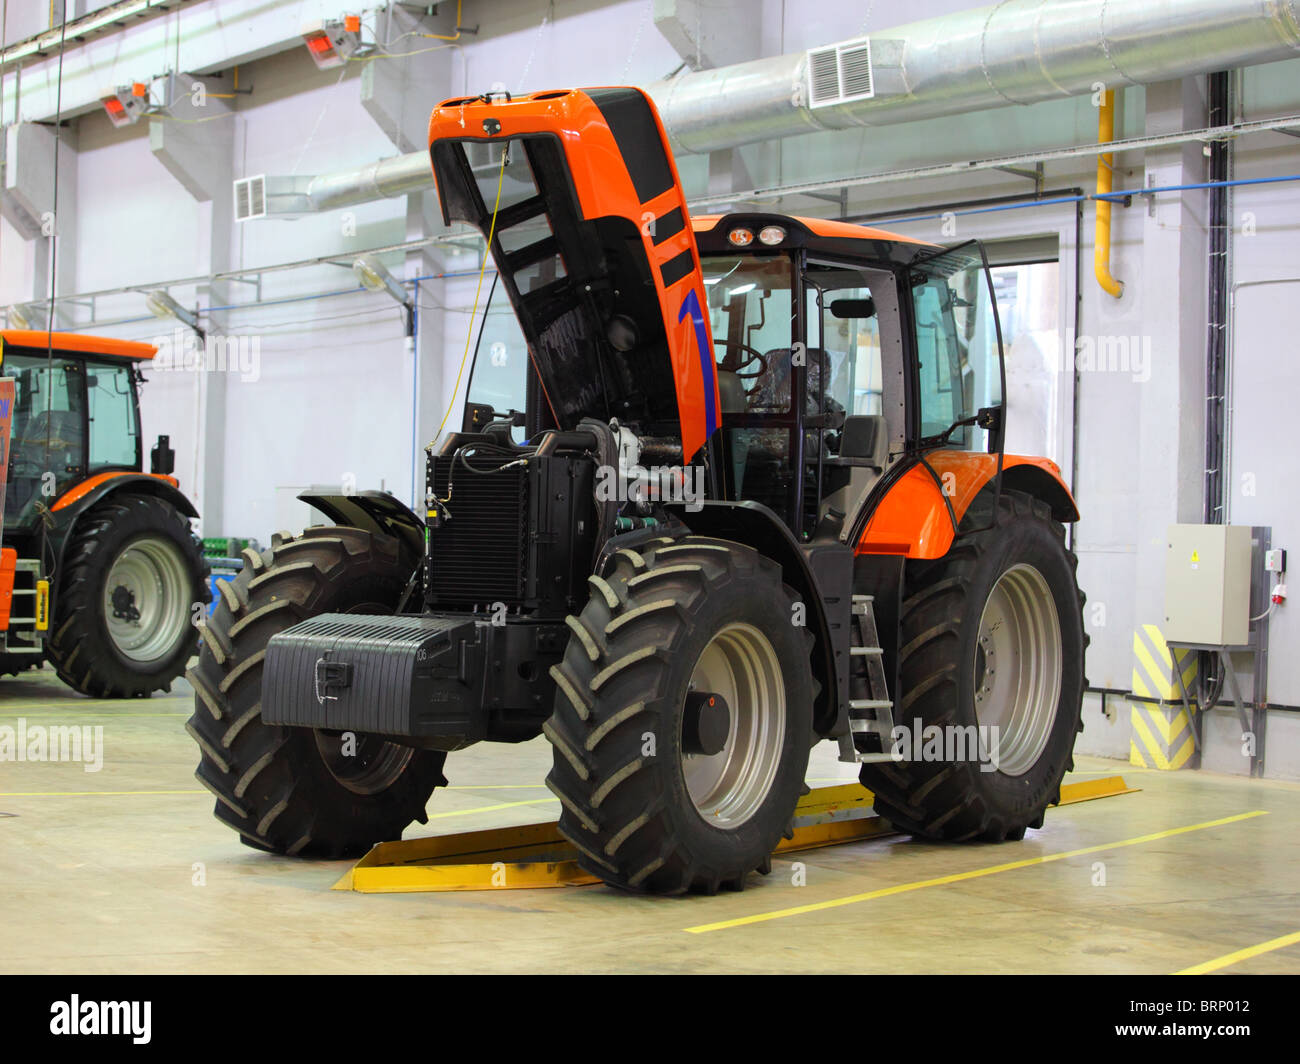 Assemblage of tractors on enterprise building berths in the European Union Stock Photo